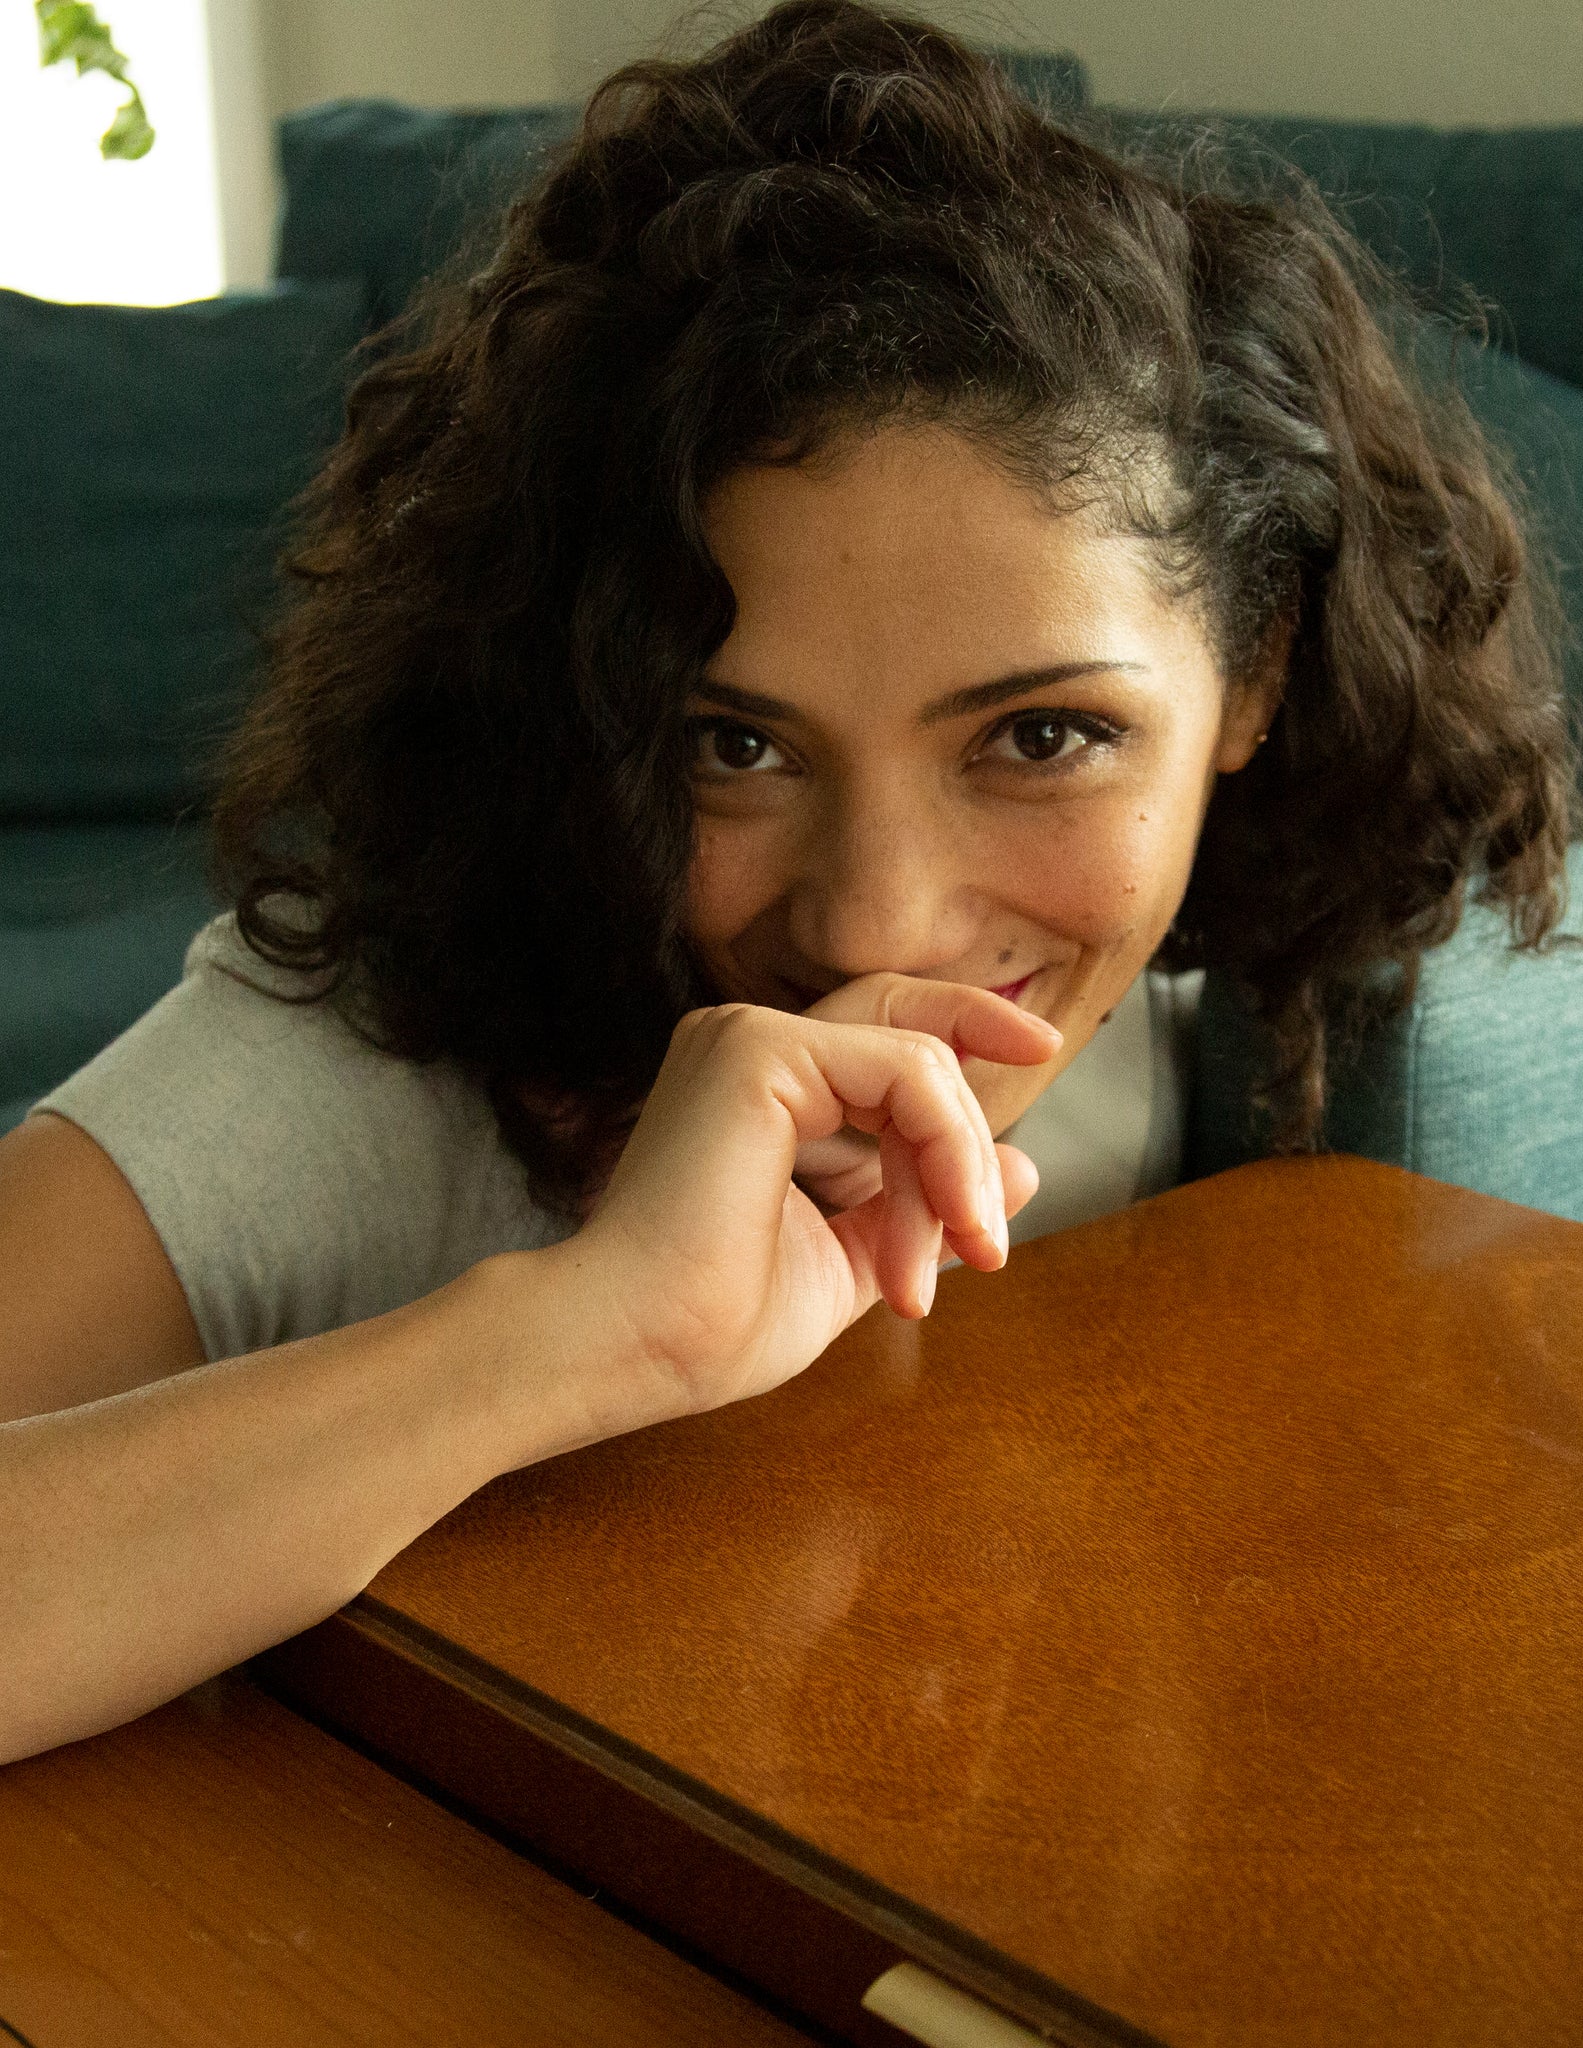 The Good Doctor Actress Jasika Nicole: One To Watch/1